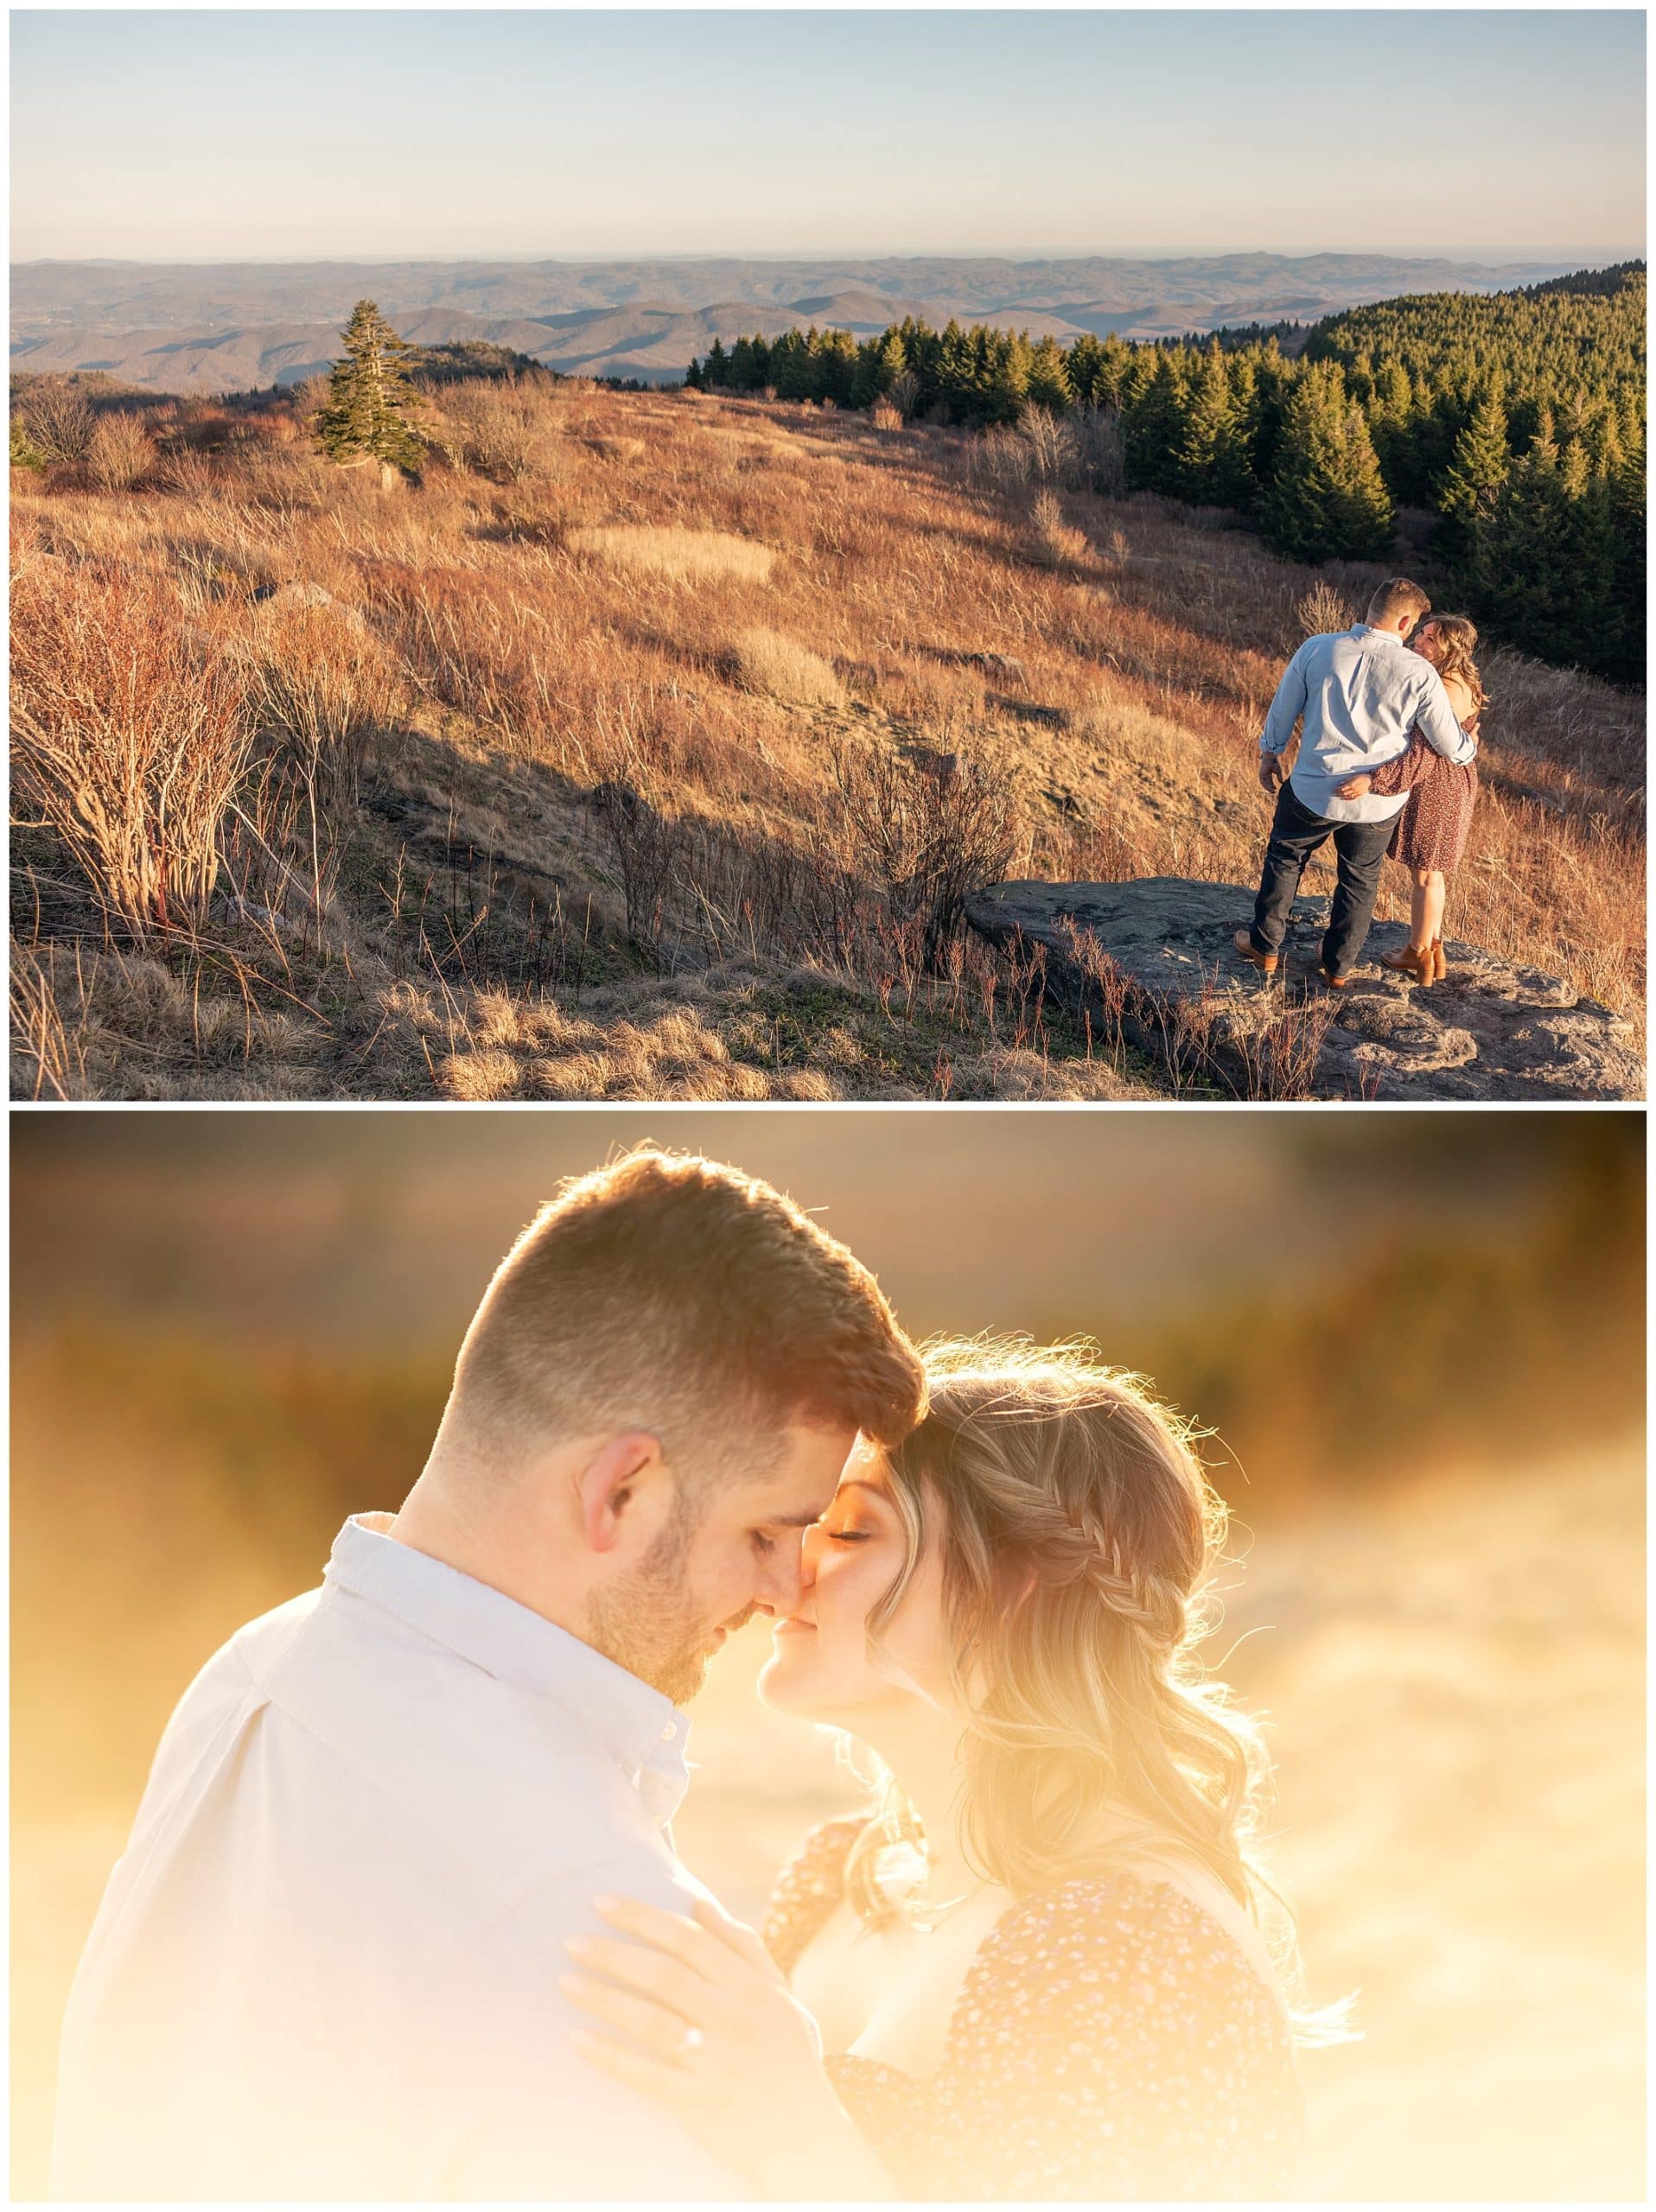 Asheville photographer Kathy Beaver takes engagement photos with mountain views during the golden hour